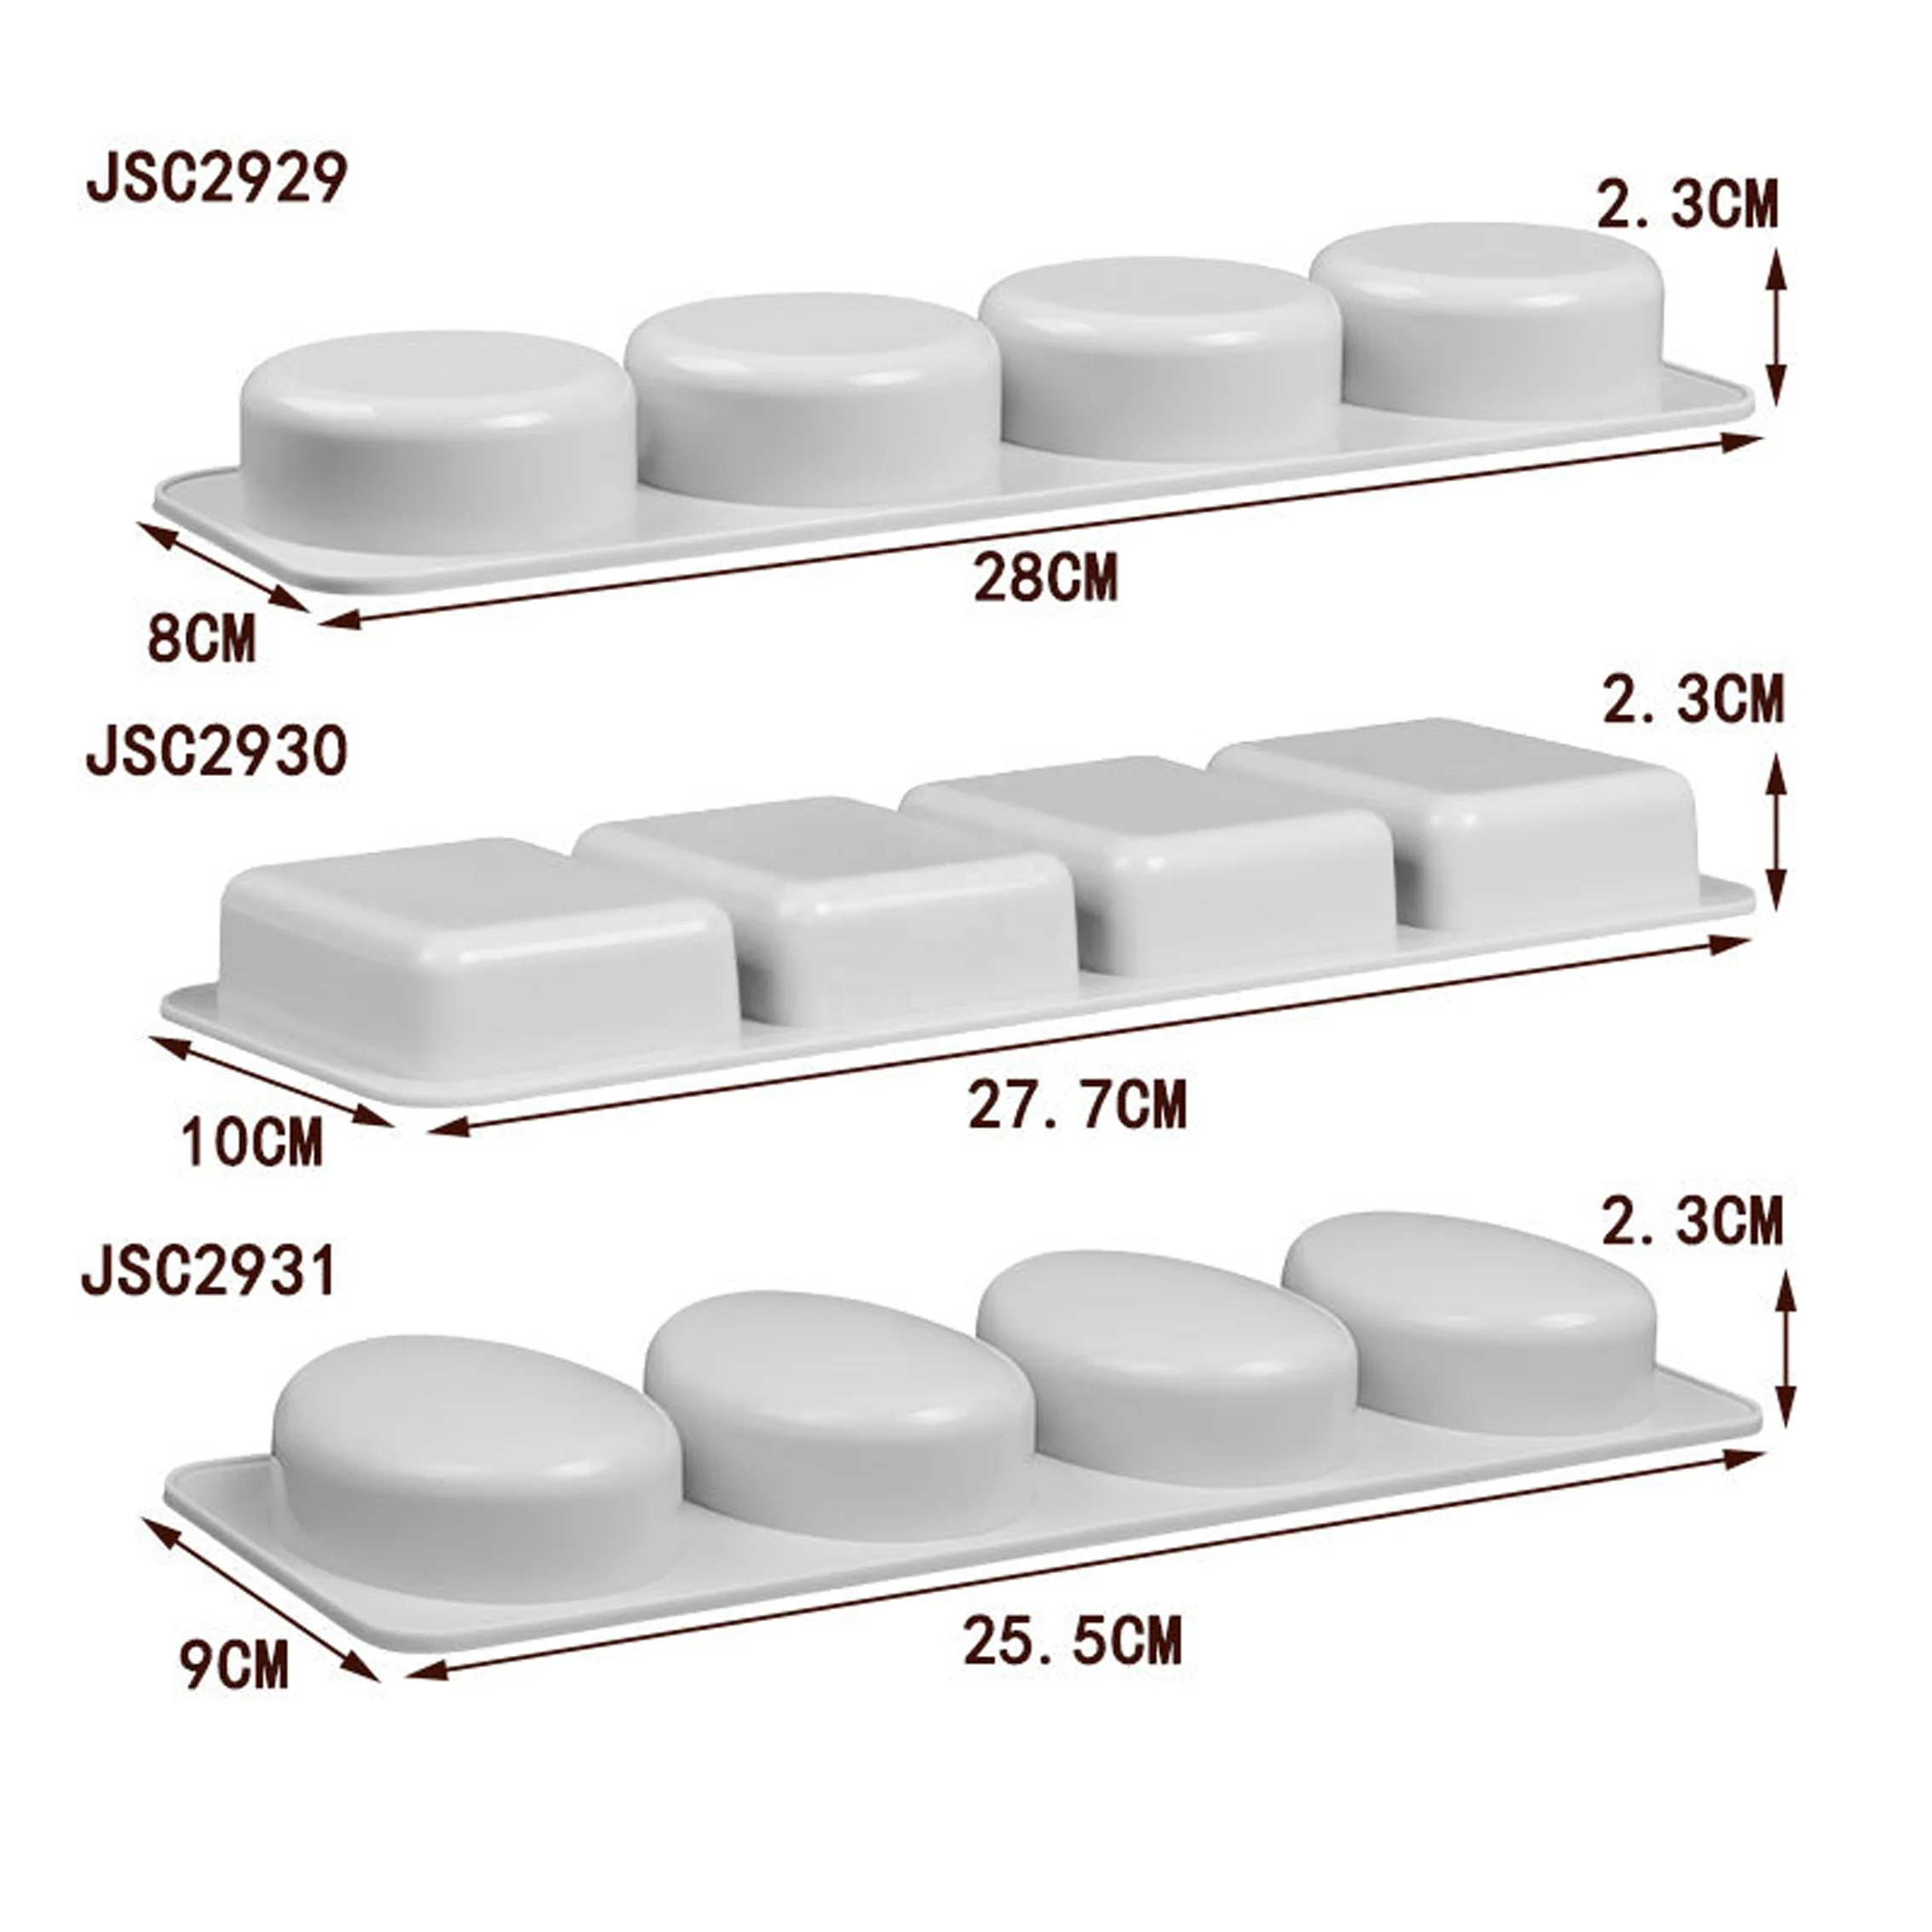 Hot Selling 6 Cavity 3D Body Oval Square Shaped Soap Candle Making Silicone Molds Resin Molds Bomb Soap Mkaing